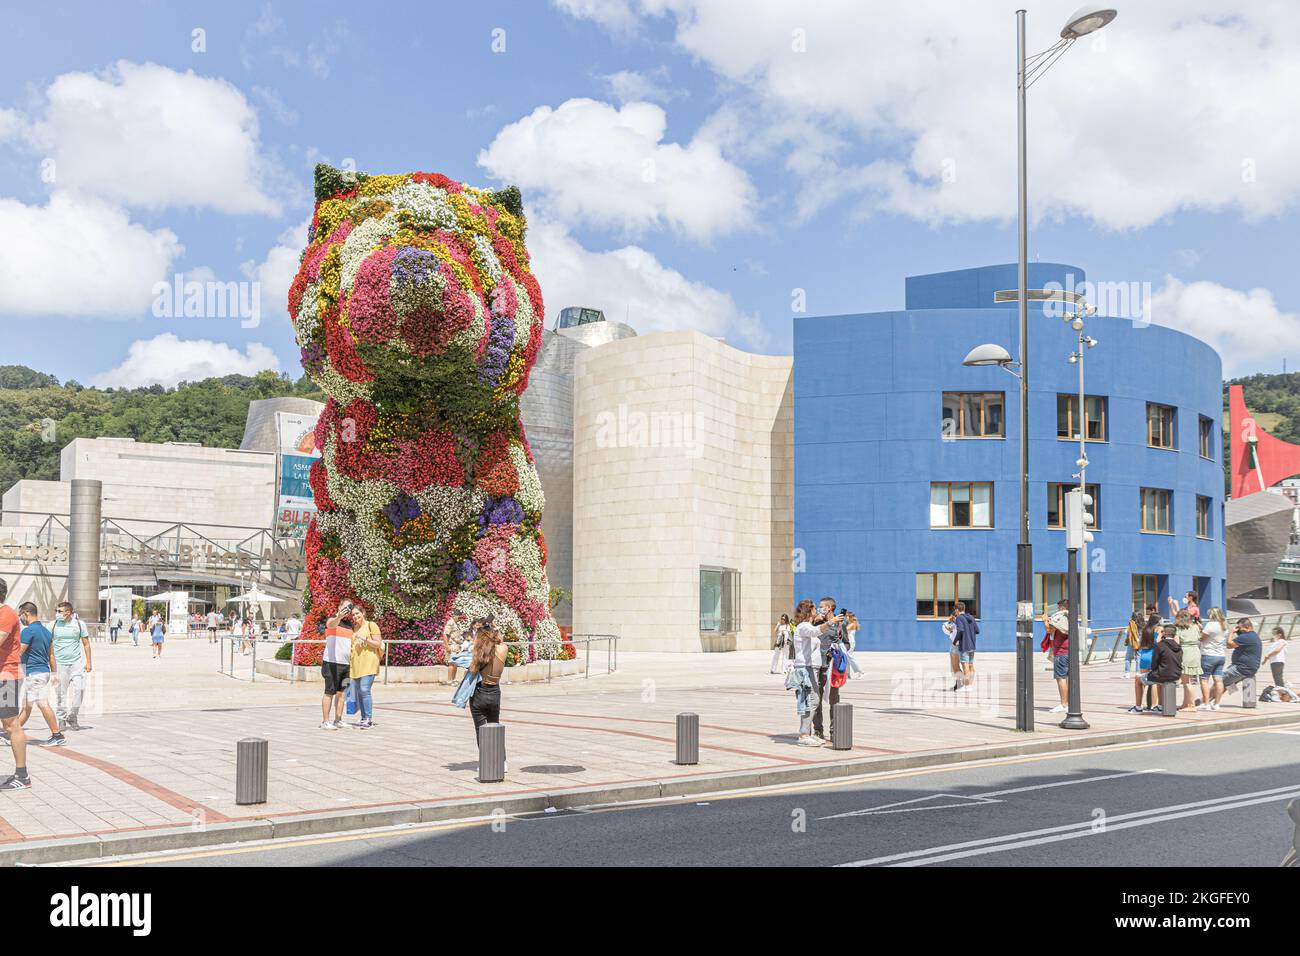 BILBAO, SPAIN-AUGUST 8, 2021: Sculpture Puppy by Jeff Koons in front of the Guggenheim Museum Bilbao Stock Photo